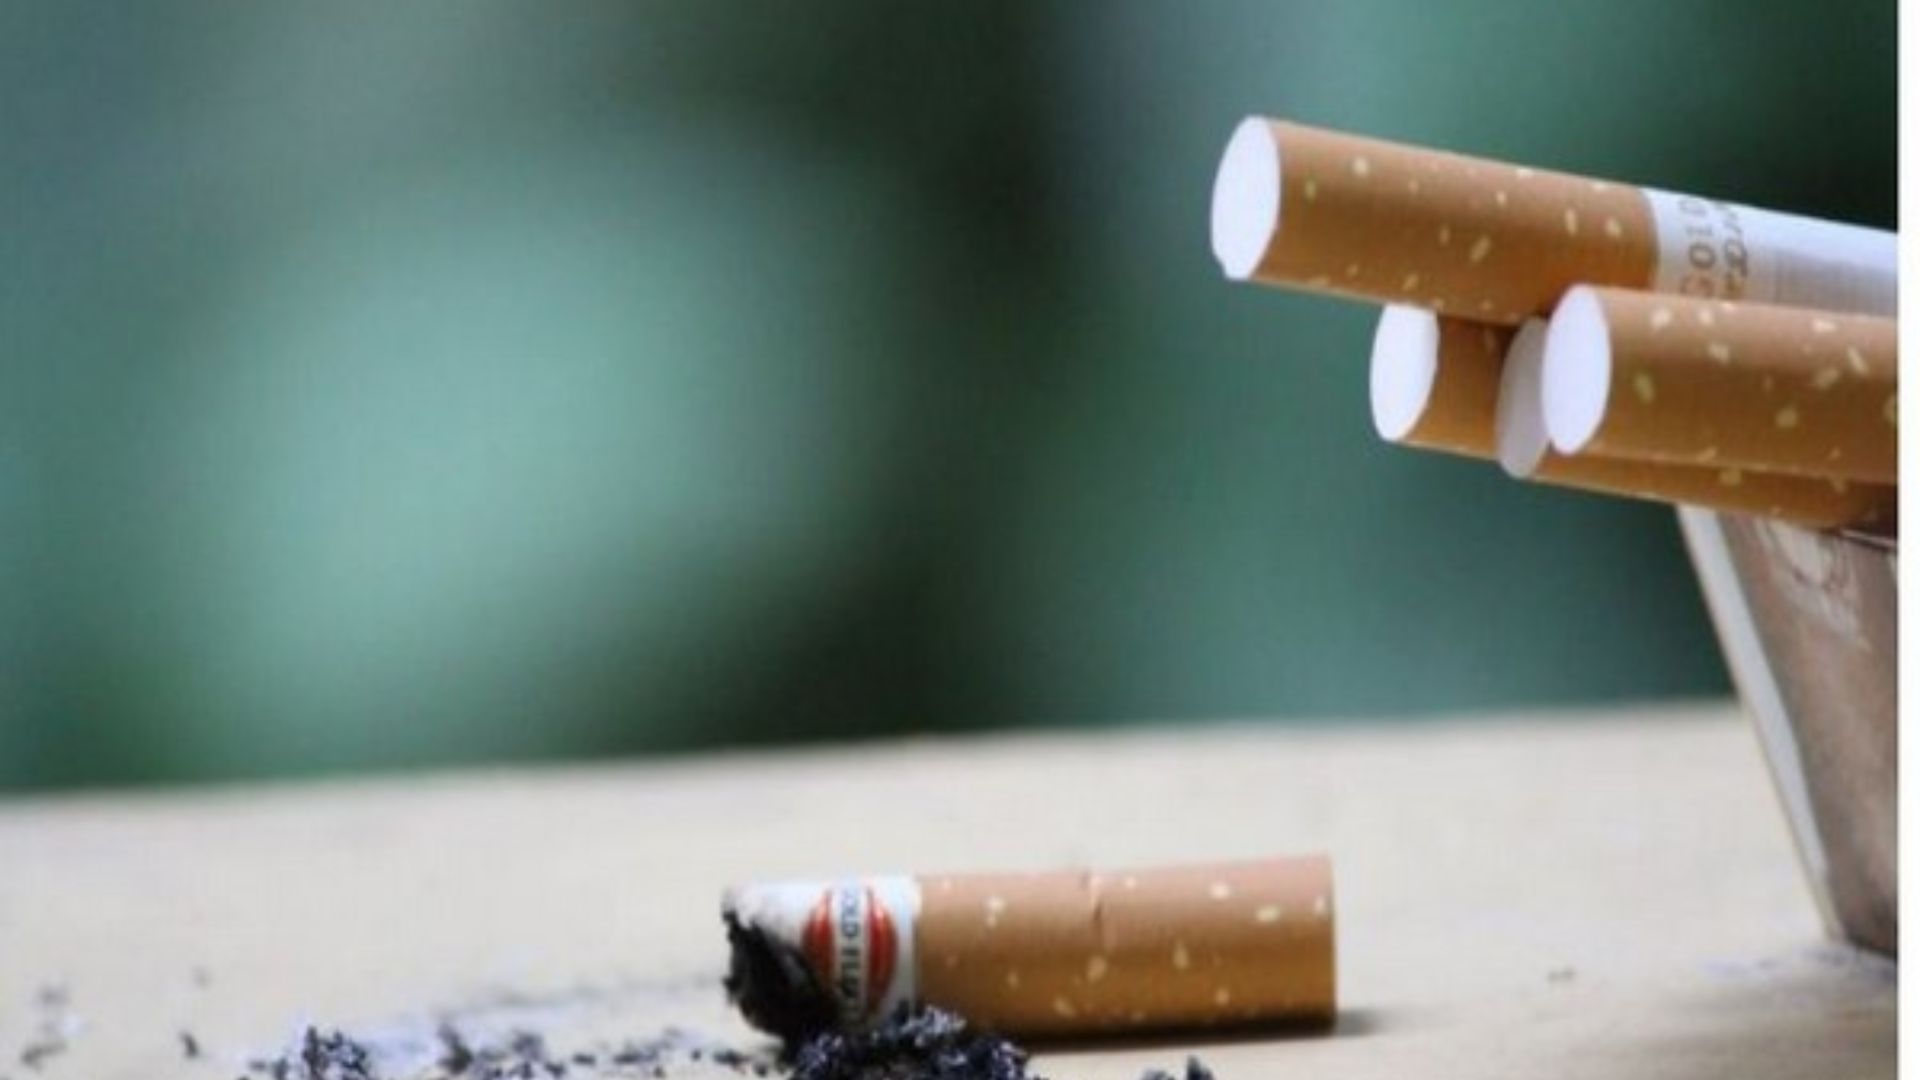 World Health Organization Urges Quick Implementation of Tobacco and E-Cigarette Controls